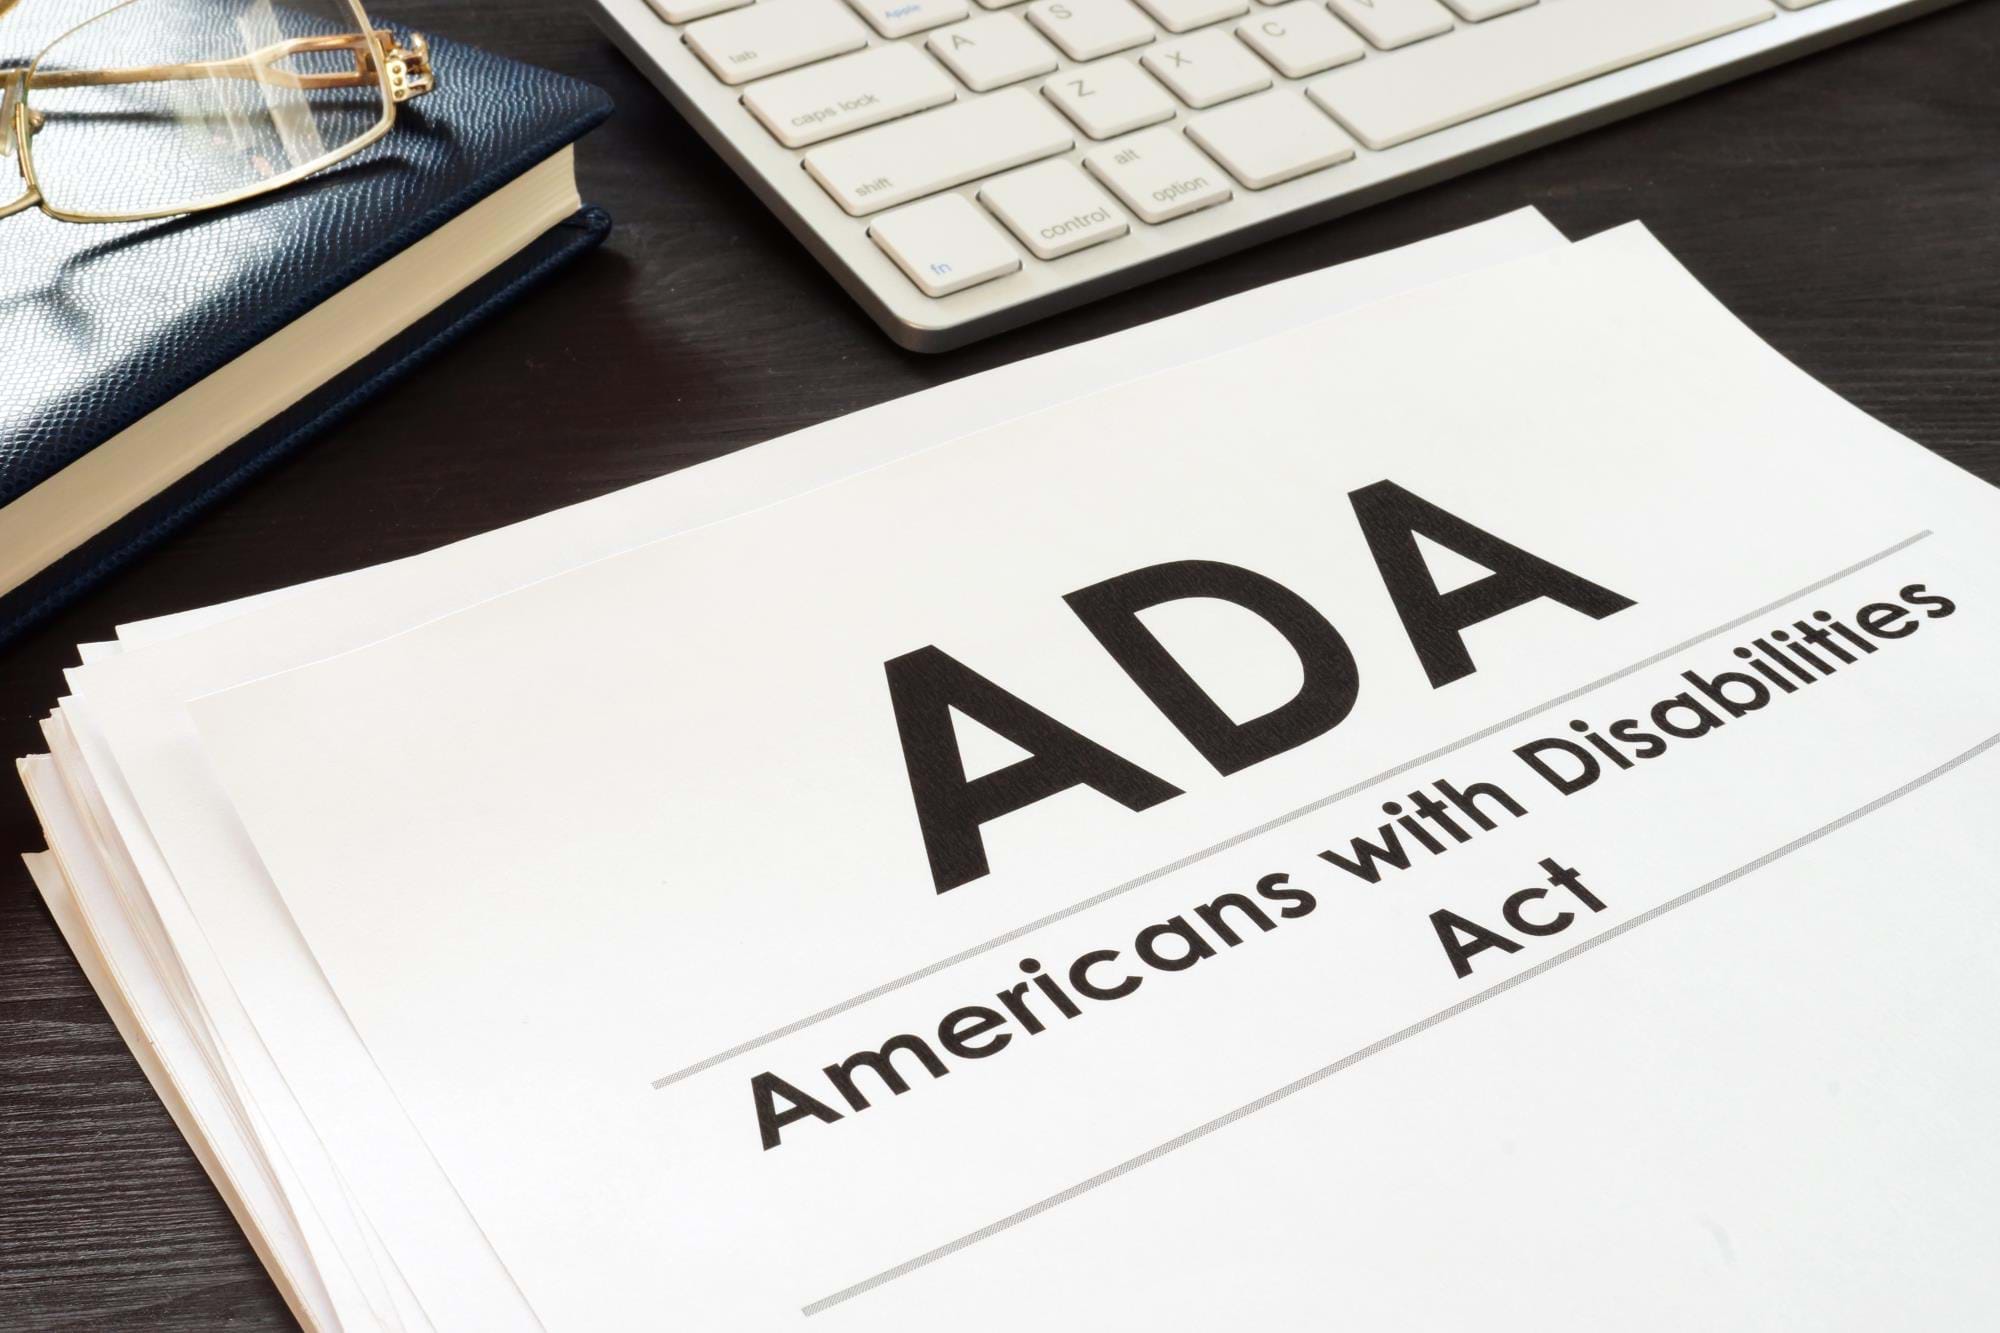 Website Accessibility Under the ADA: Where Guidance is Scarce and Lawsuits are Plentiful